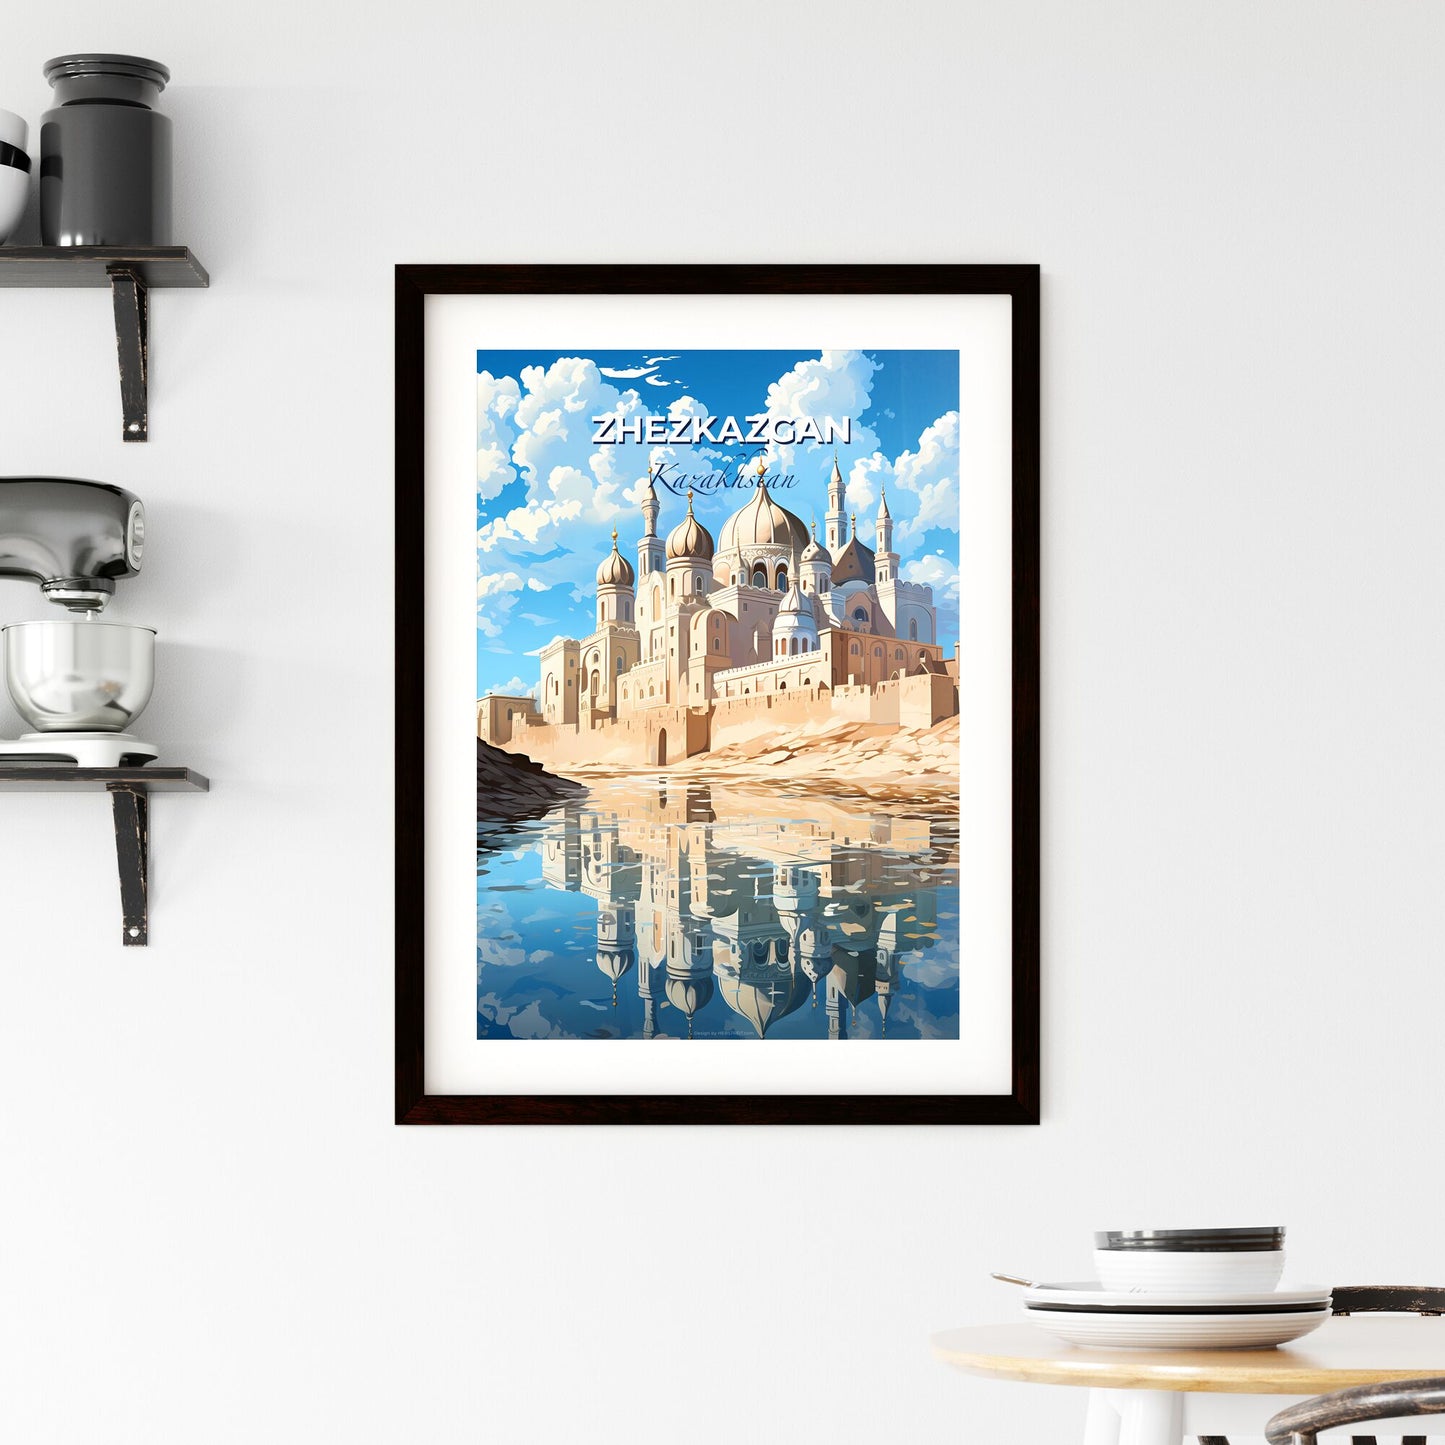 Zhezkazgan, Kazakhstan, A Poster of a castle with towers and towers and a body of water Default Title